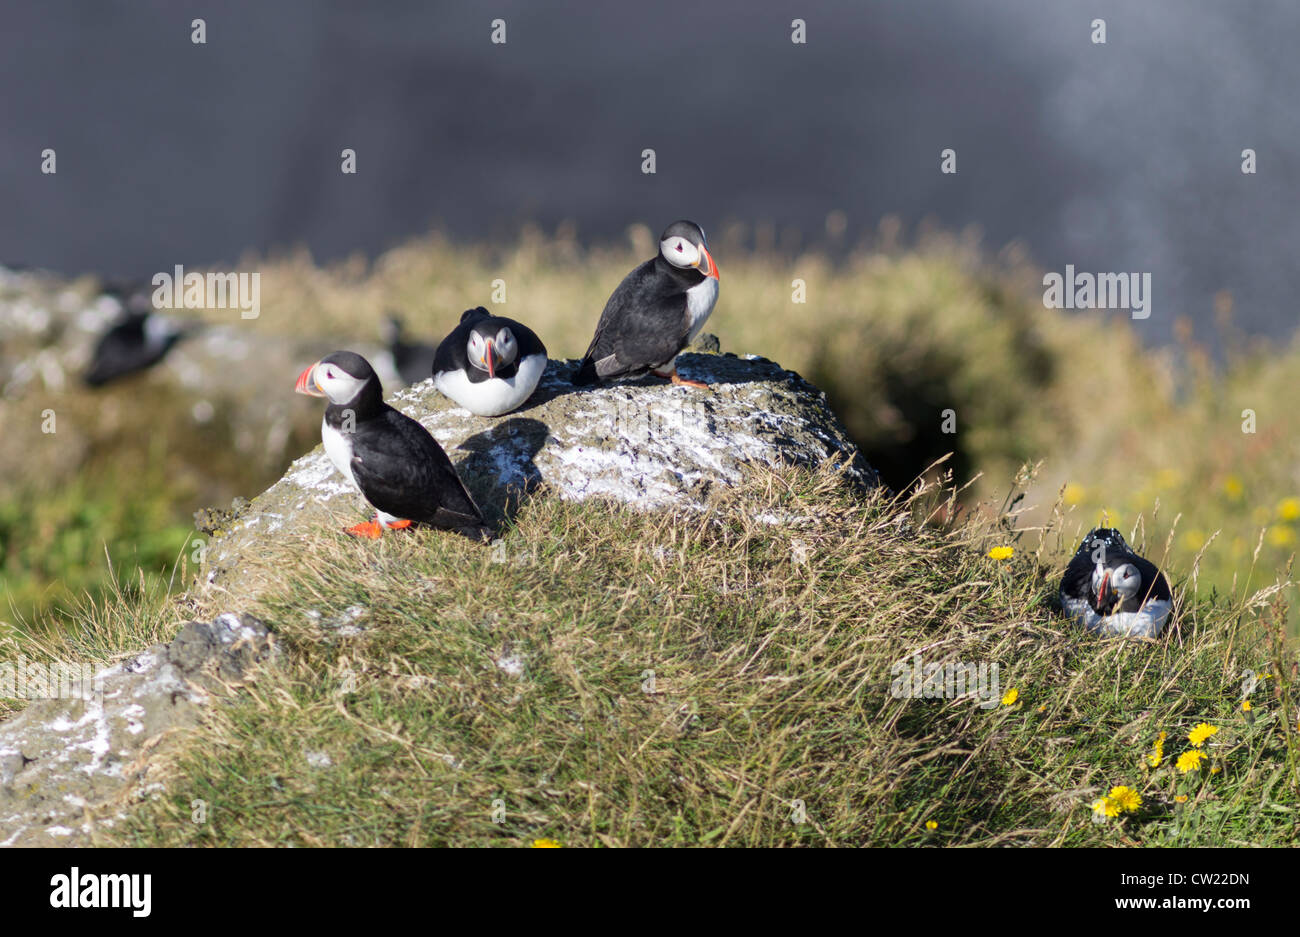 Puffins at Dyrholaey cliffs Iceland Stock Photo